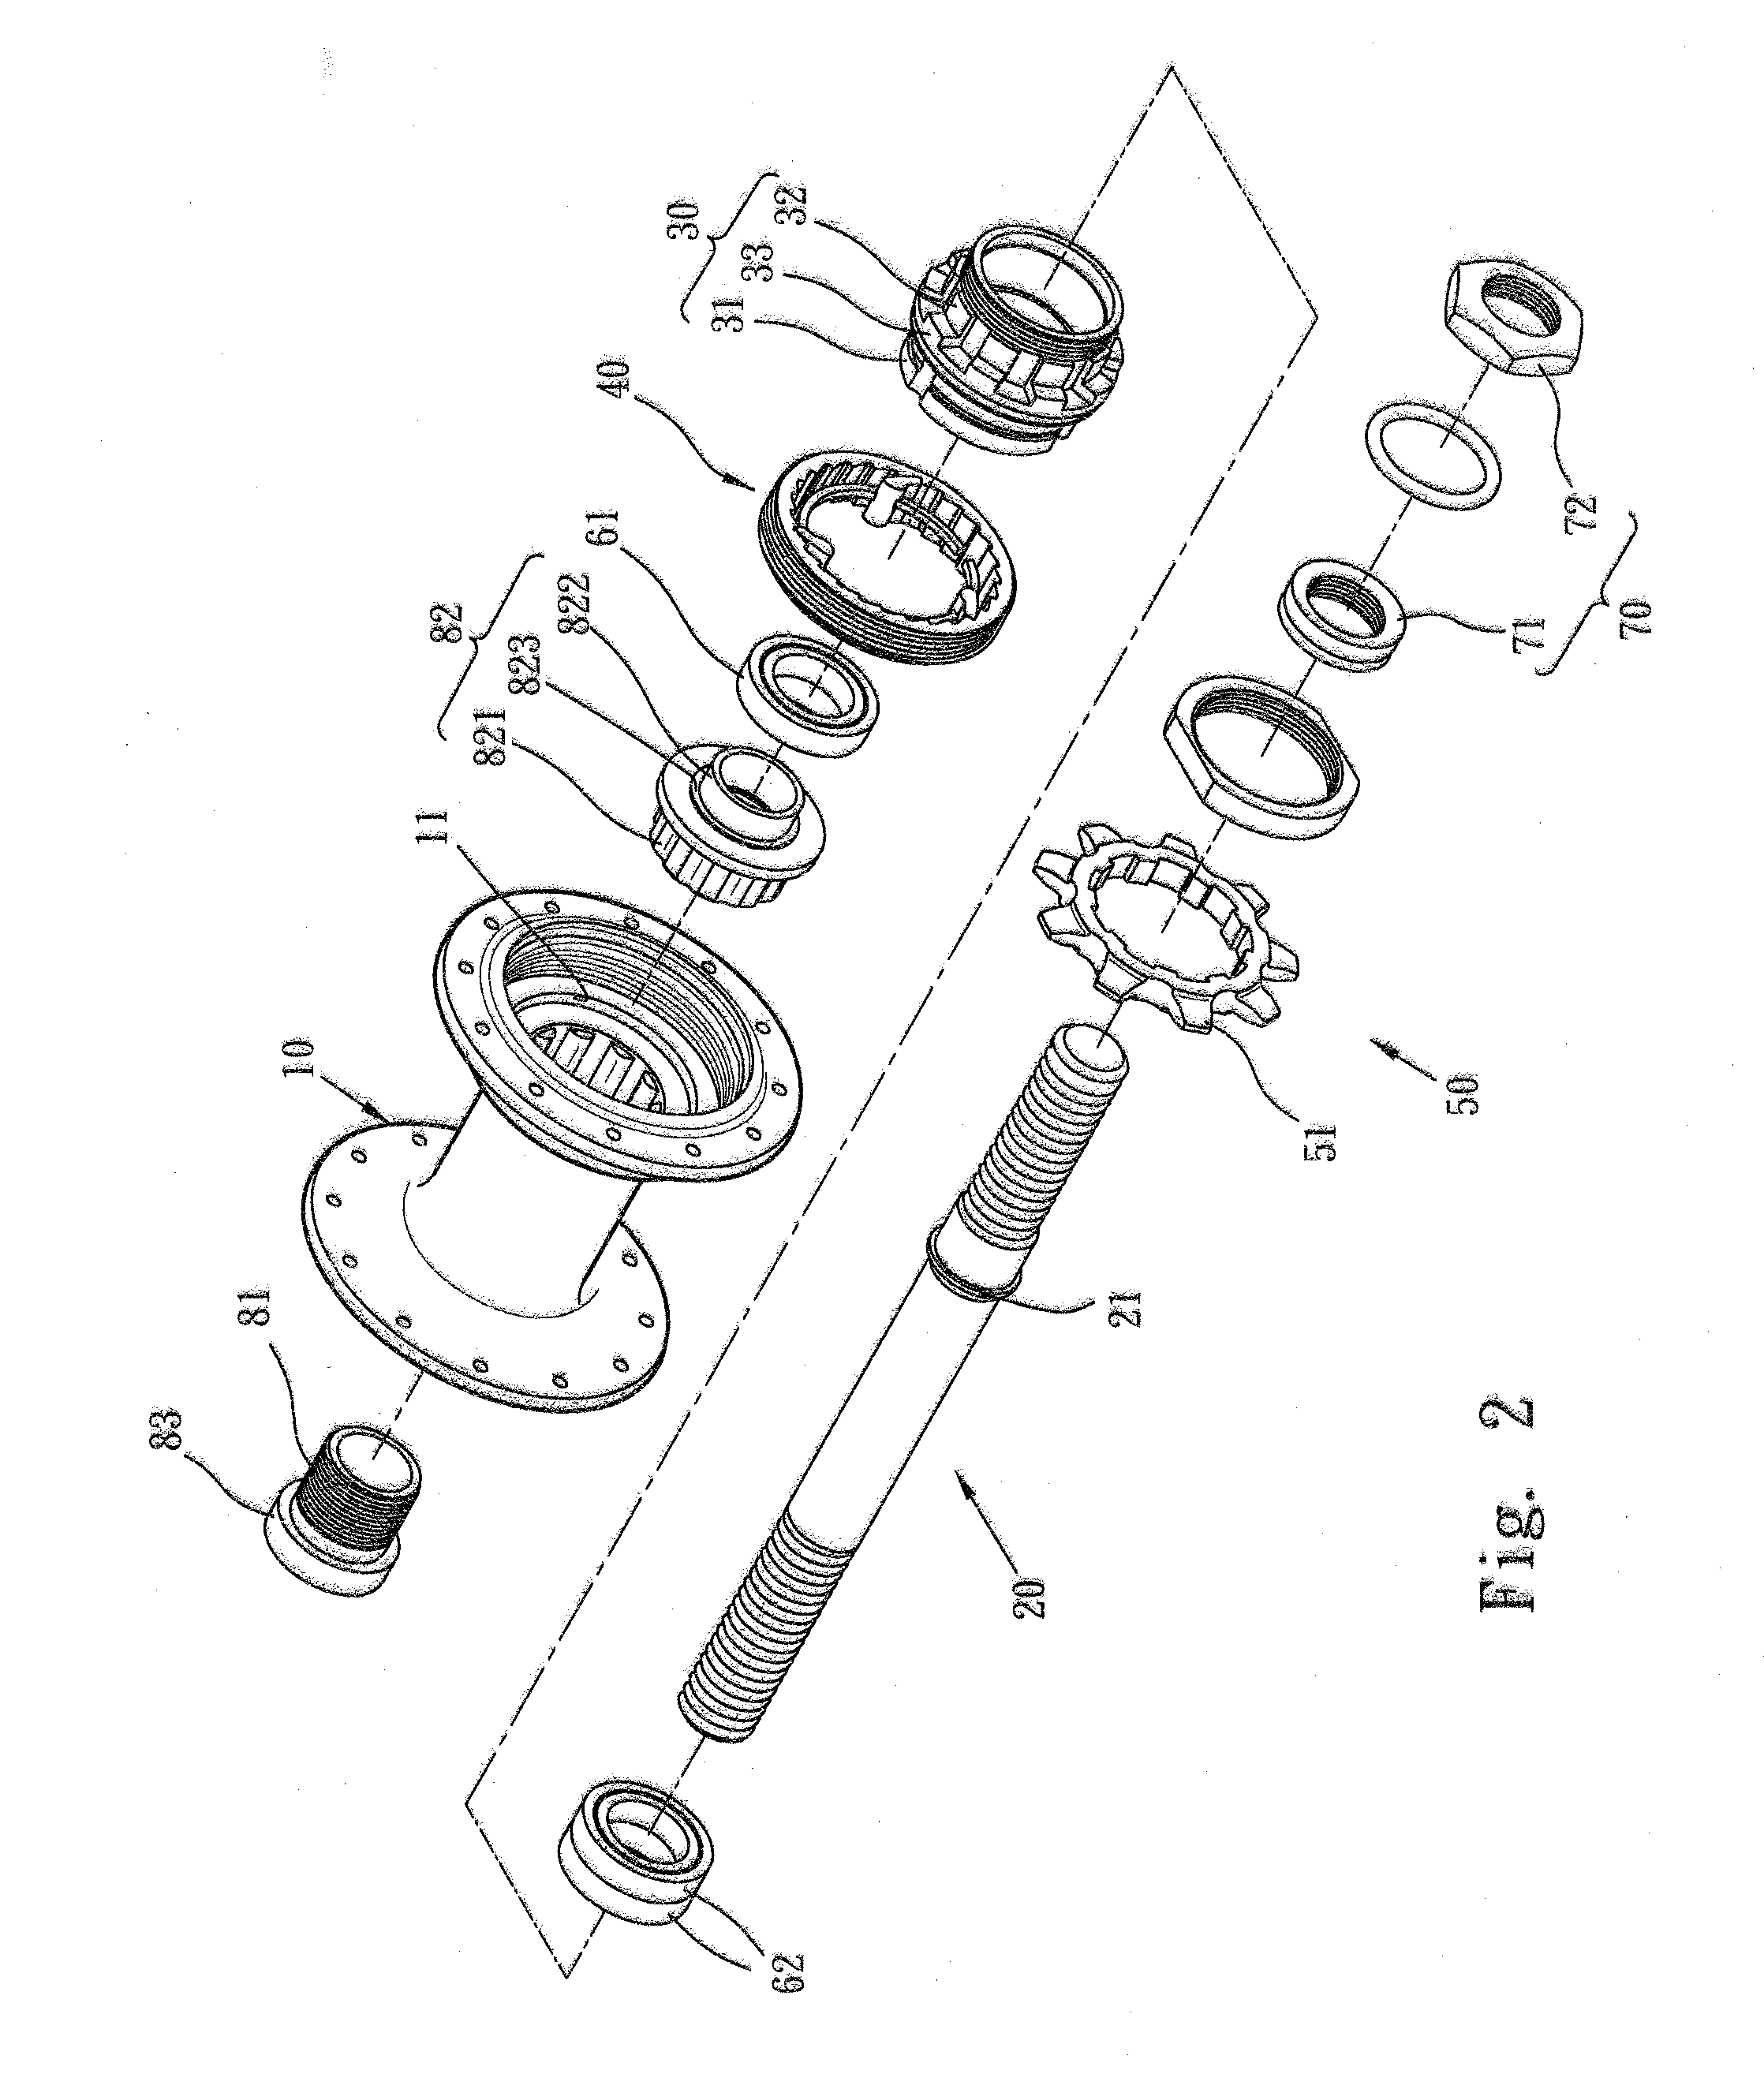 Bicycle hub assembly with two bearings